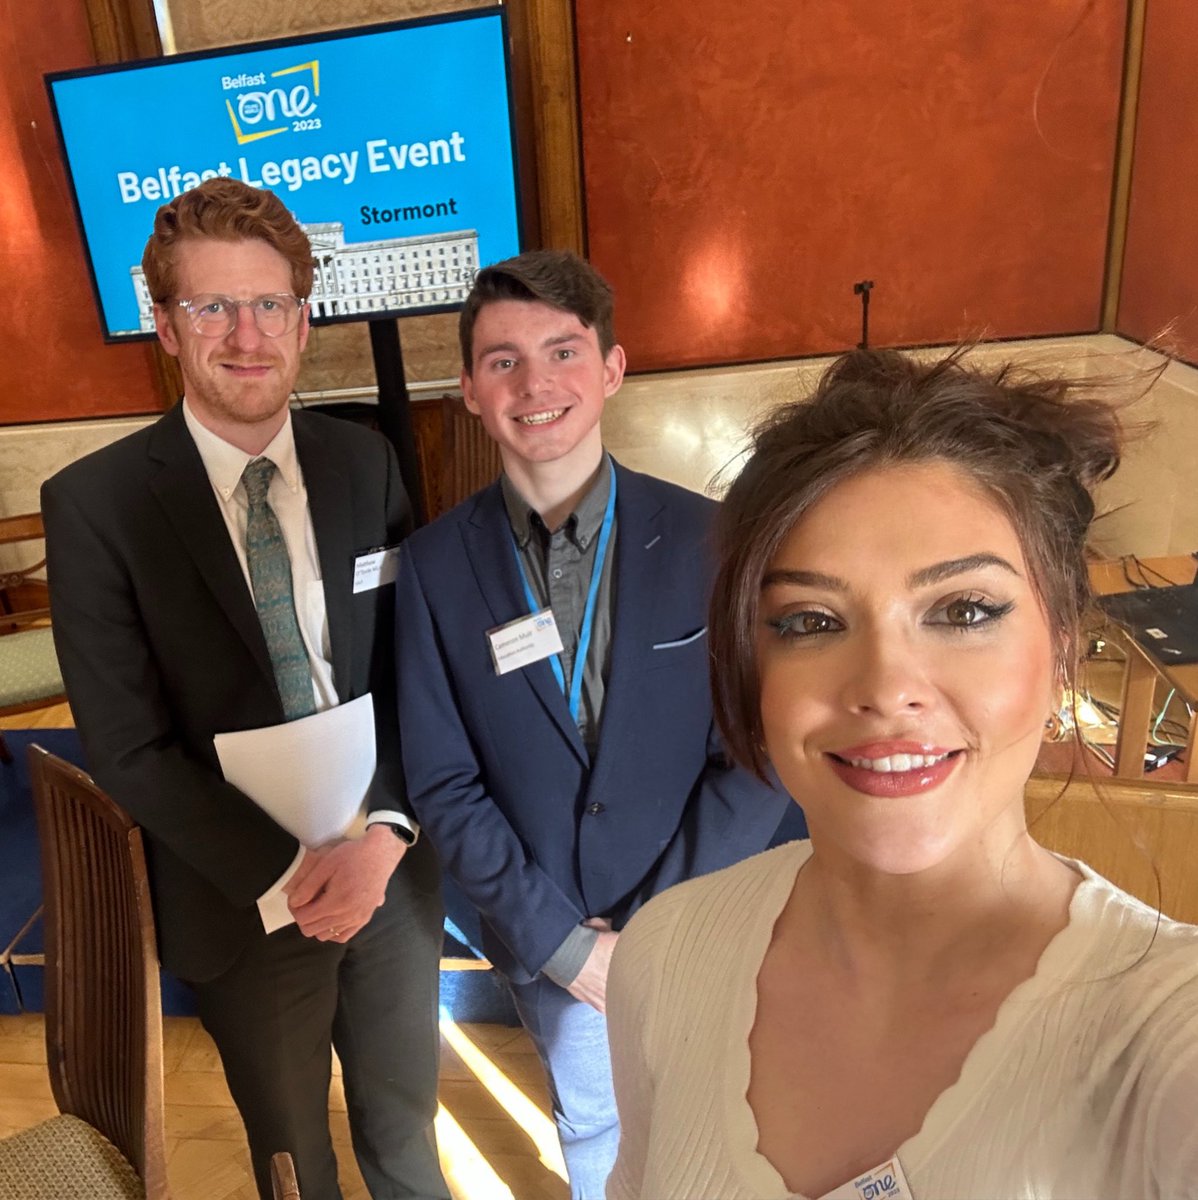 We loved dropping into the @OneYoungWorld legacy event in Stormont this week! Meeting the change makers of tomorrow. I love watching young people grow in confidence due to events like this. Thank you to the OYW 2023 team for their focus on importance of peace & reconciliation.